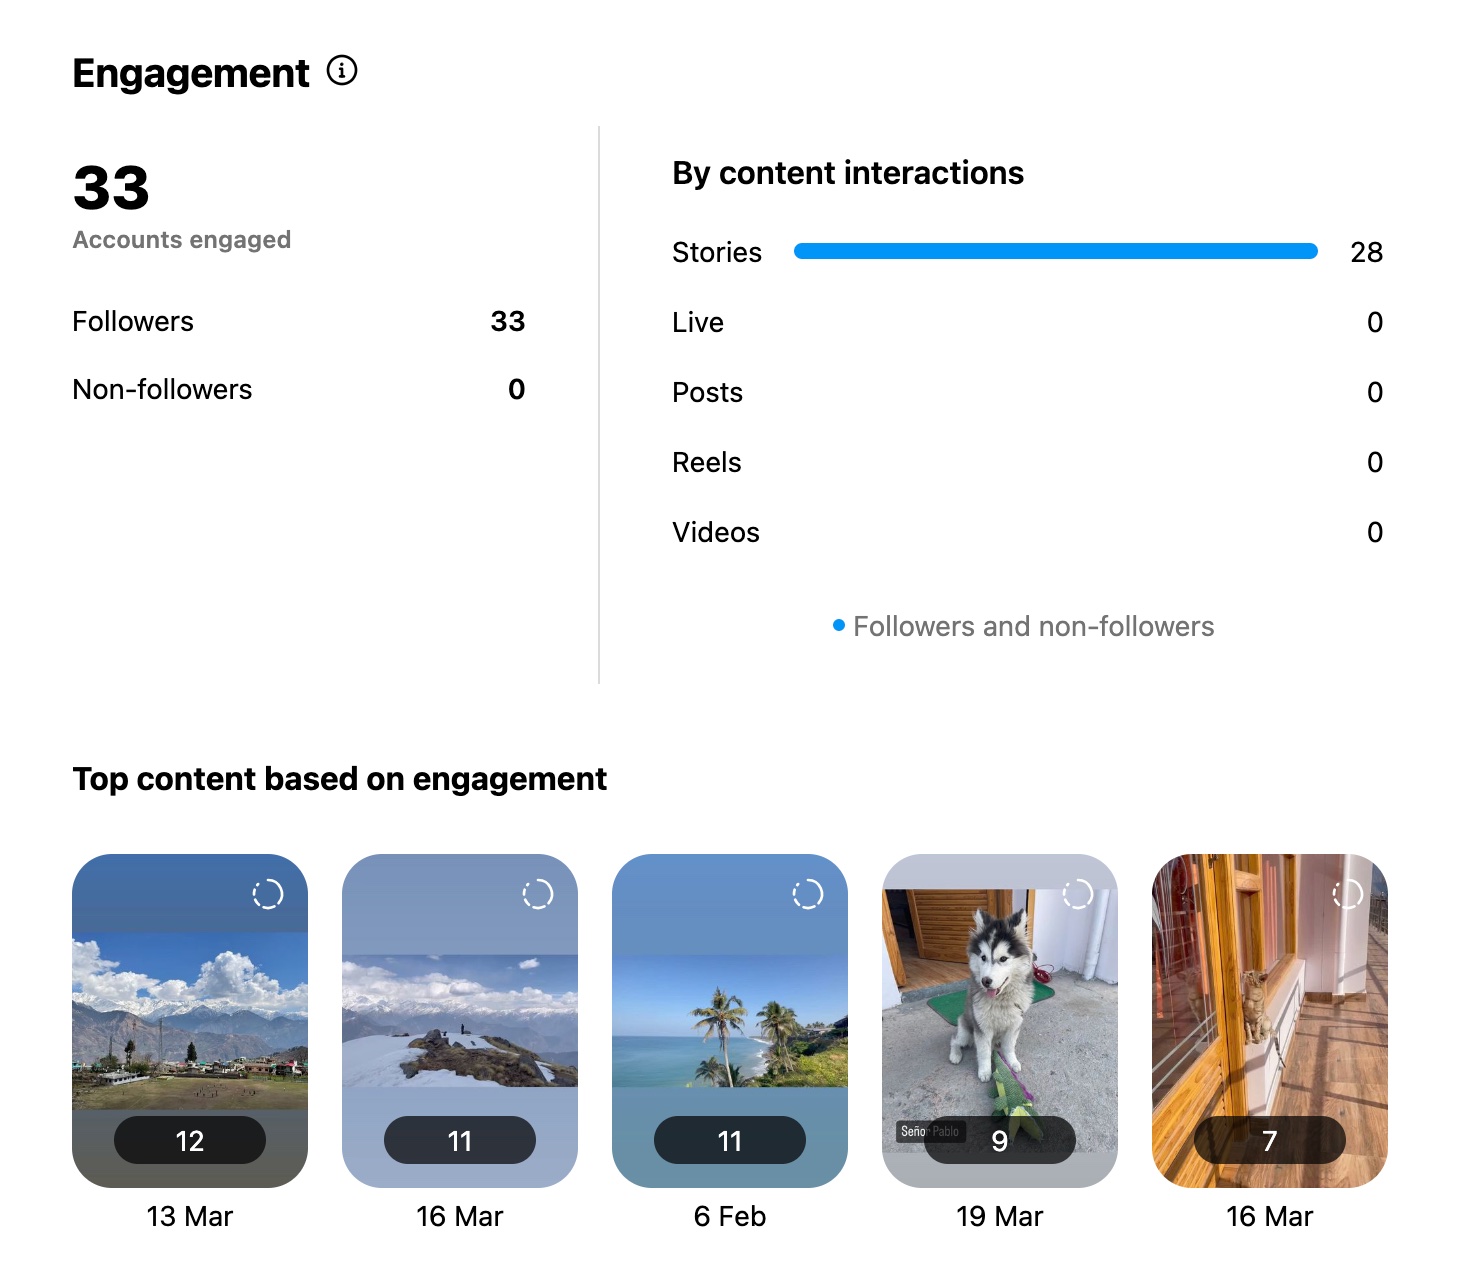 Engagement analytics on Instagram insights showing the best performing content and formats based on engagement.